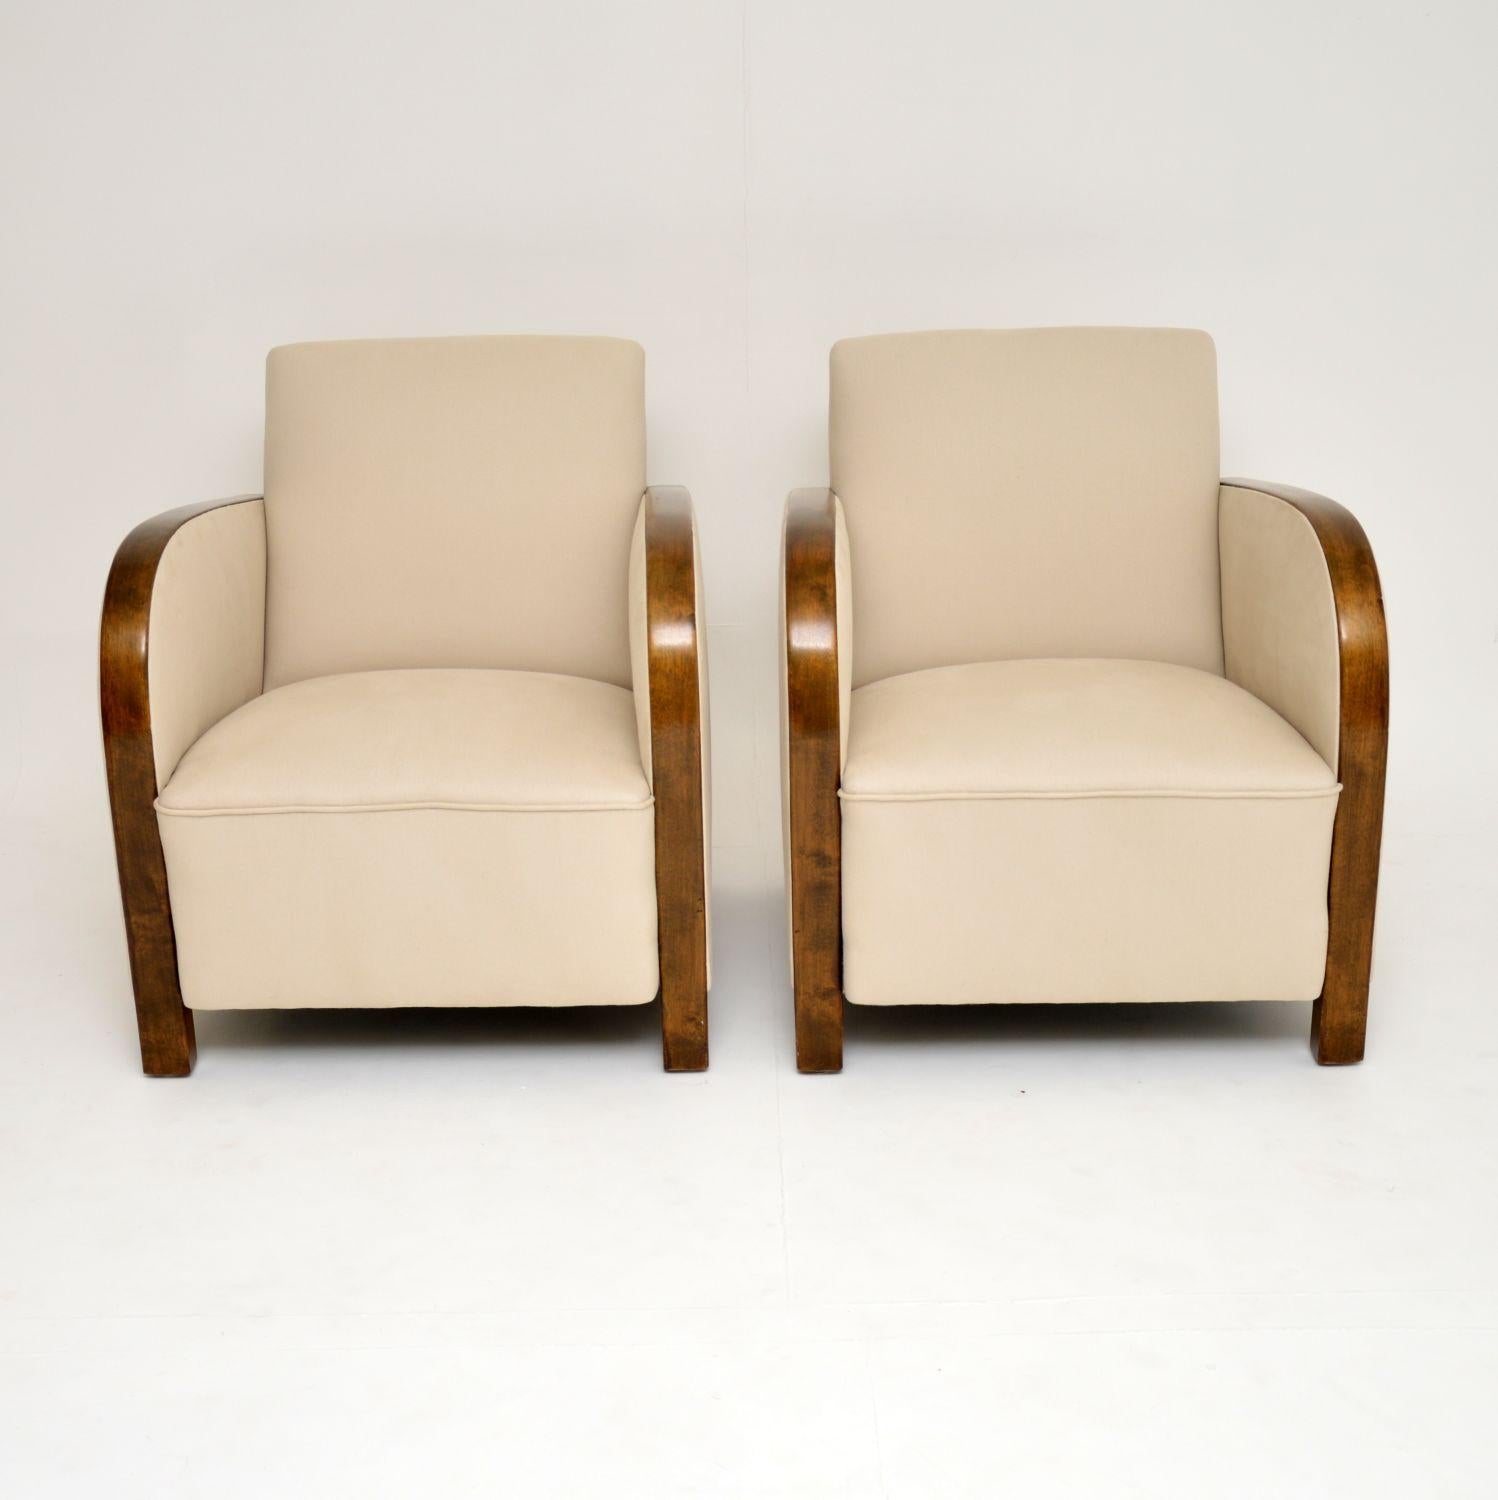 Pair of original Swedish Art Deco Satin Birch armchairs, that have just come over from Sweden, been re-polished and re-upholstered in our regular cream natural cotton fabric.

We have been waiting for ages for this next batch of Art Deco armchairs